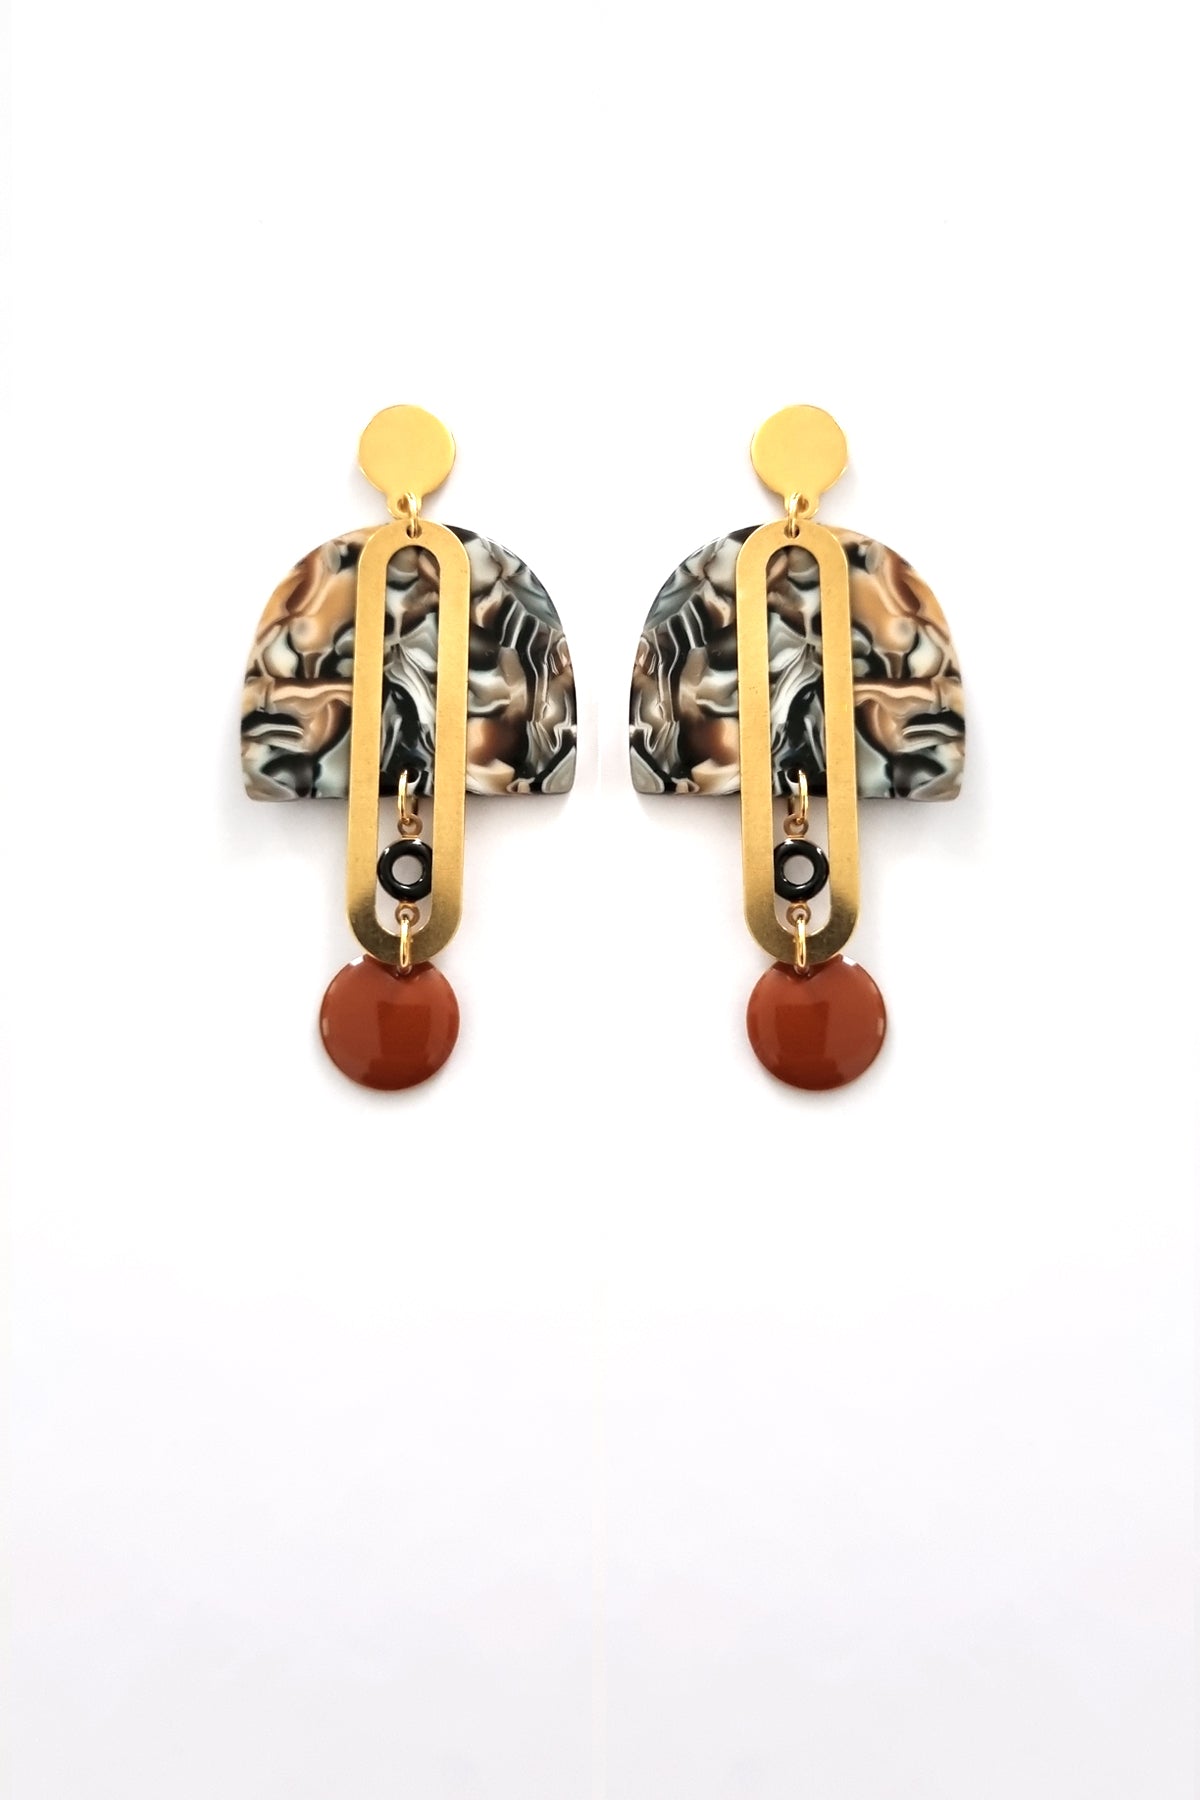 A pair of stud dangle earrings sits against a white background. They feature a brown multicoloured acrylic arch, an elongated oval brass piece with a small black enamel connector attaching the acrylic  piece to the brass, and  at the bottom hangs a brown enamel dot.   